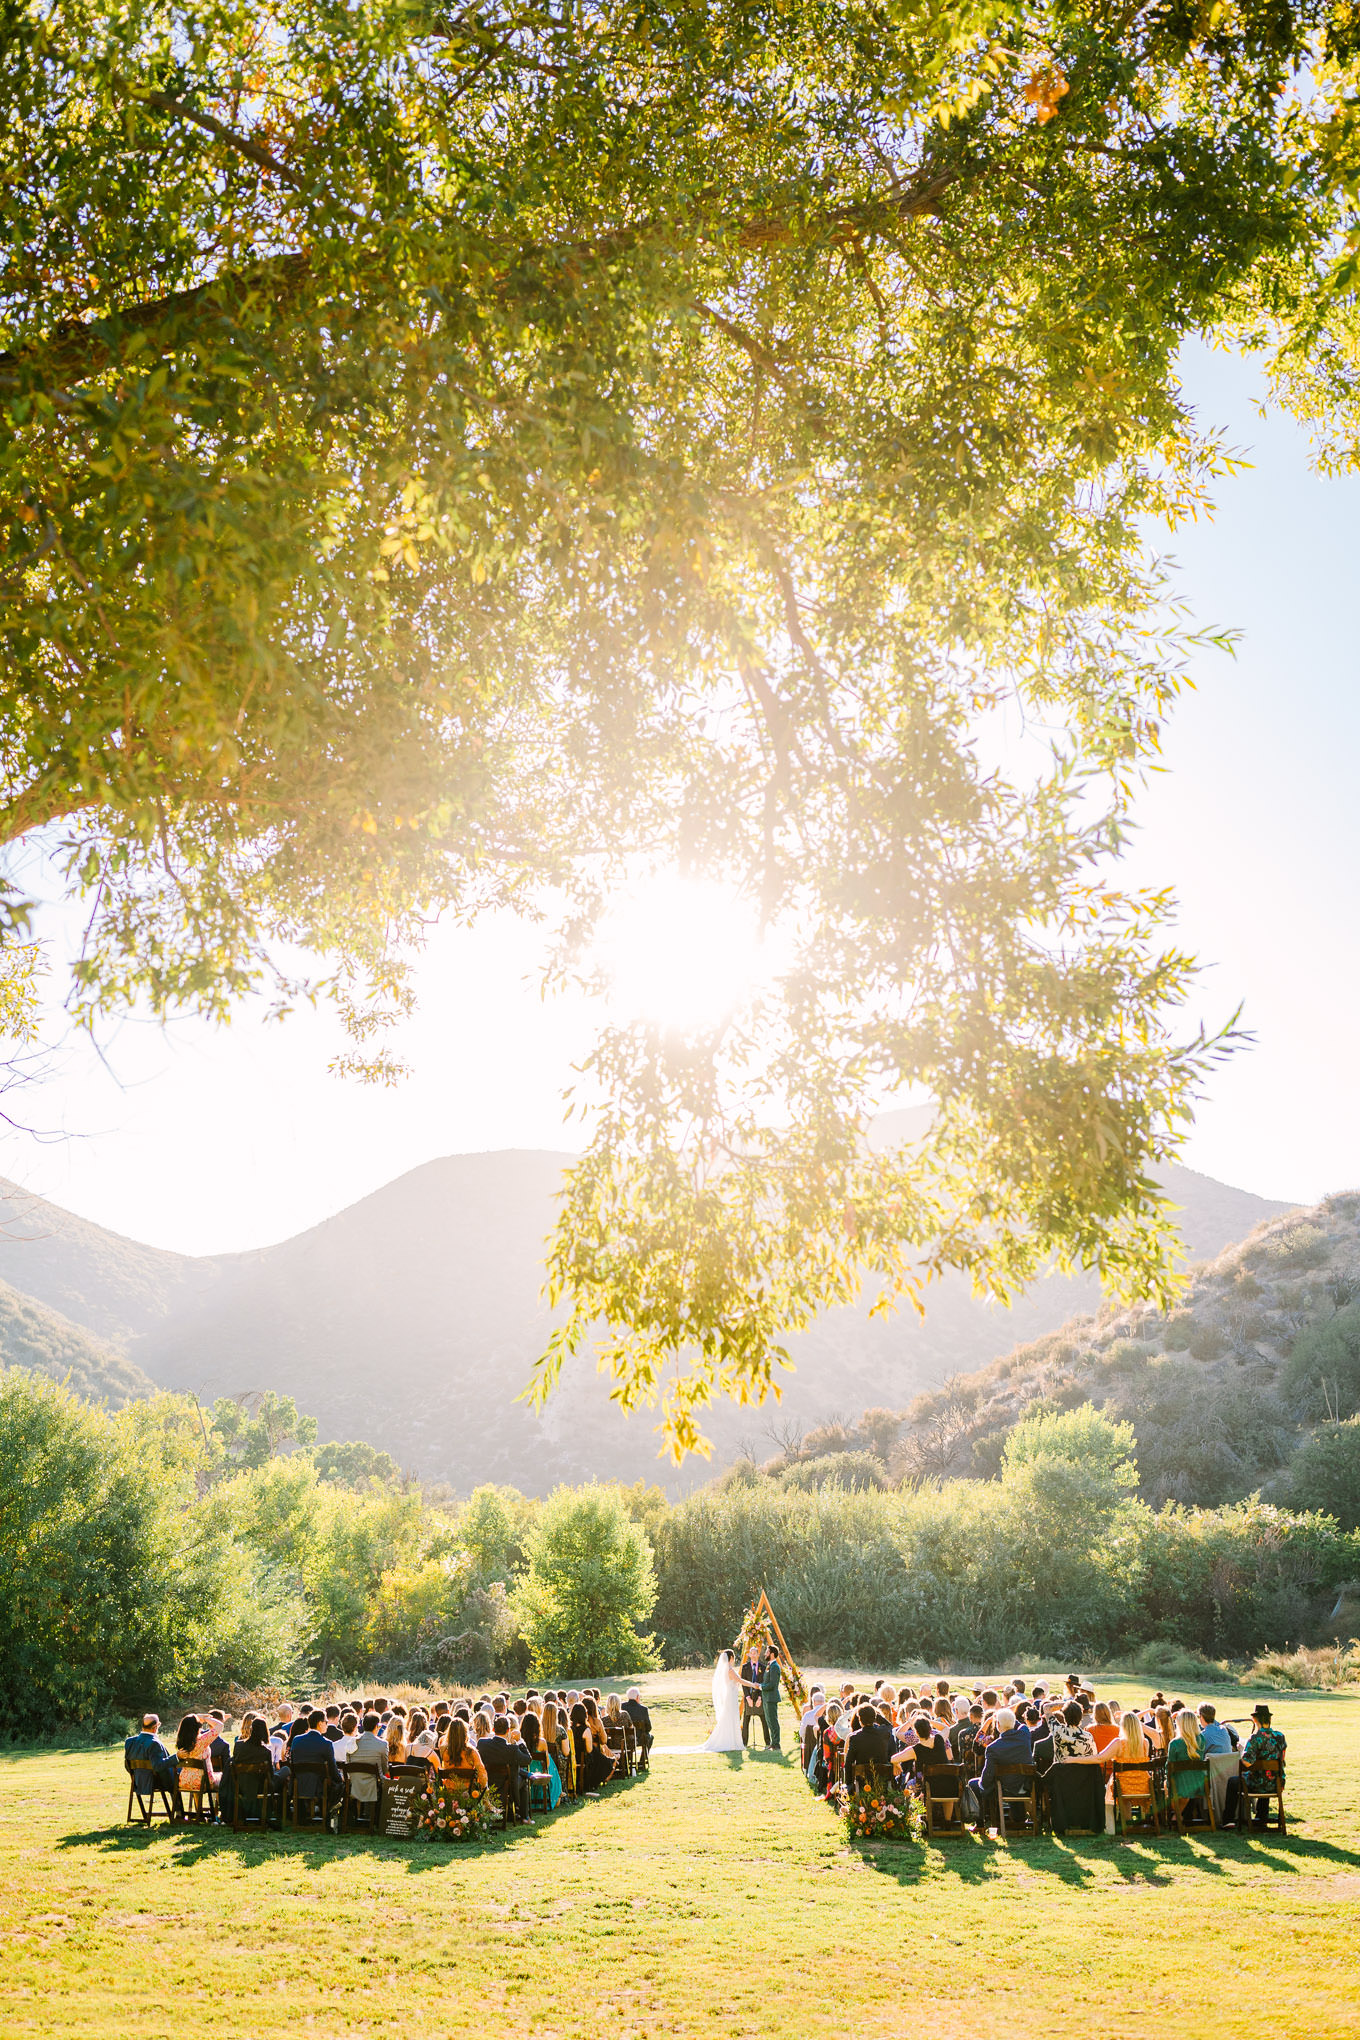 Canyon Creek Summer Camp wedding | Wedding and elopement photography roundup | Los Angeles and Palm Springs photographer | #losangeleswedding #palmspringswedding #elopementphotographer Source: Mary Costa Photography | Los Angeles